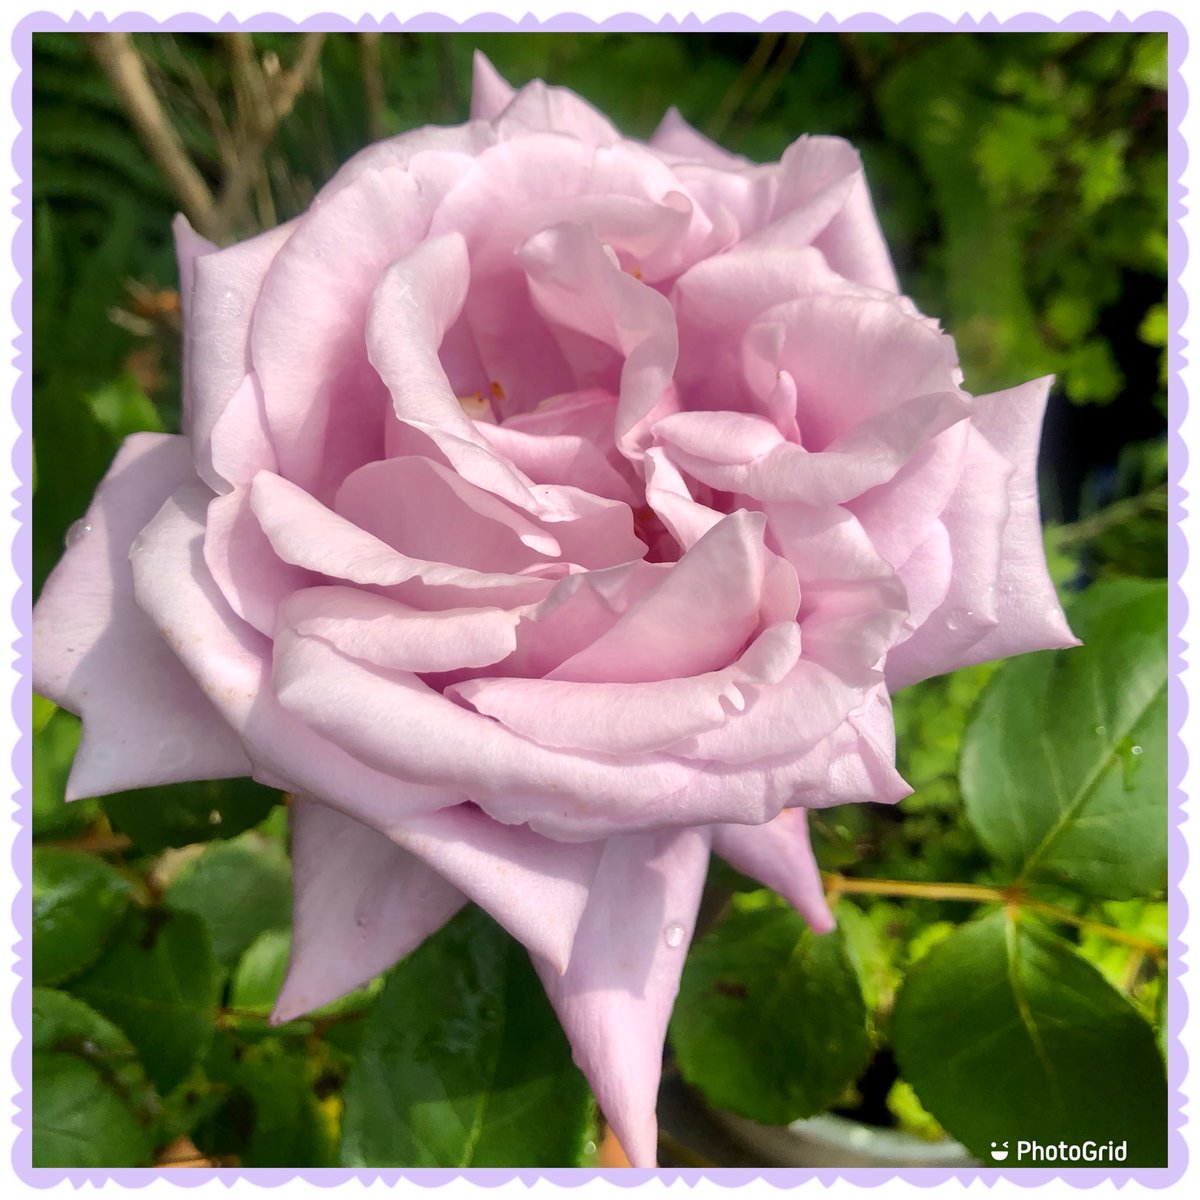 Rose ‘twice in a blue moon’ a massive bloom 💗#RoseWednesday #Roses #Wednesdayvibe #Gardening